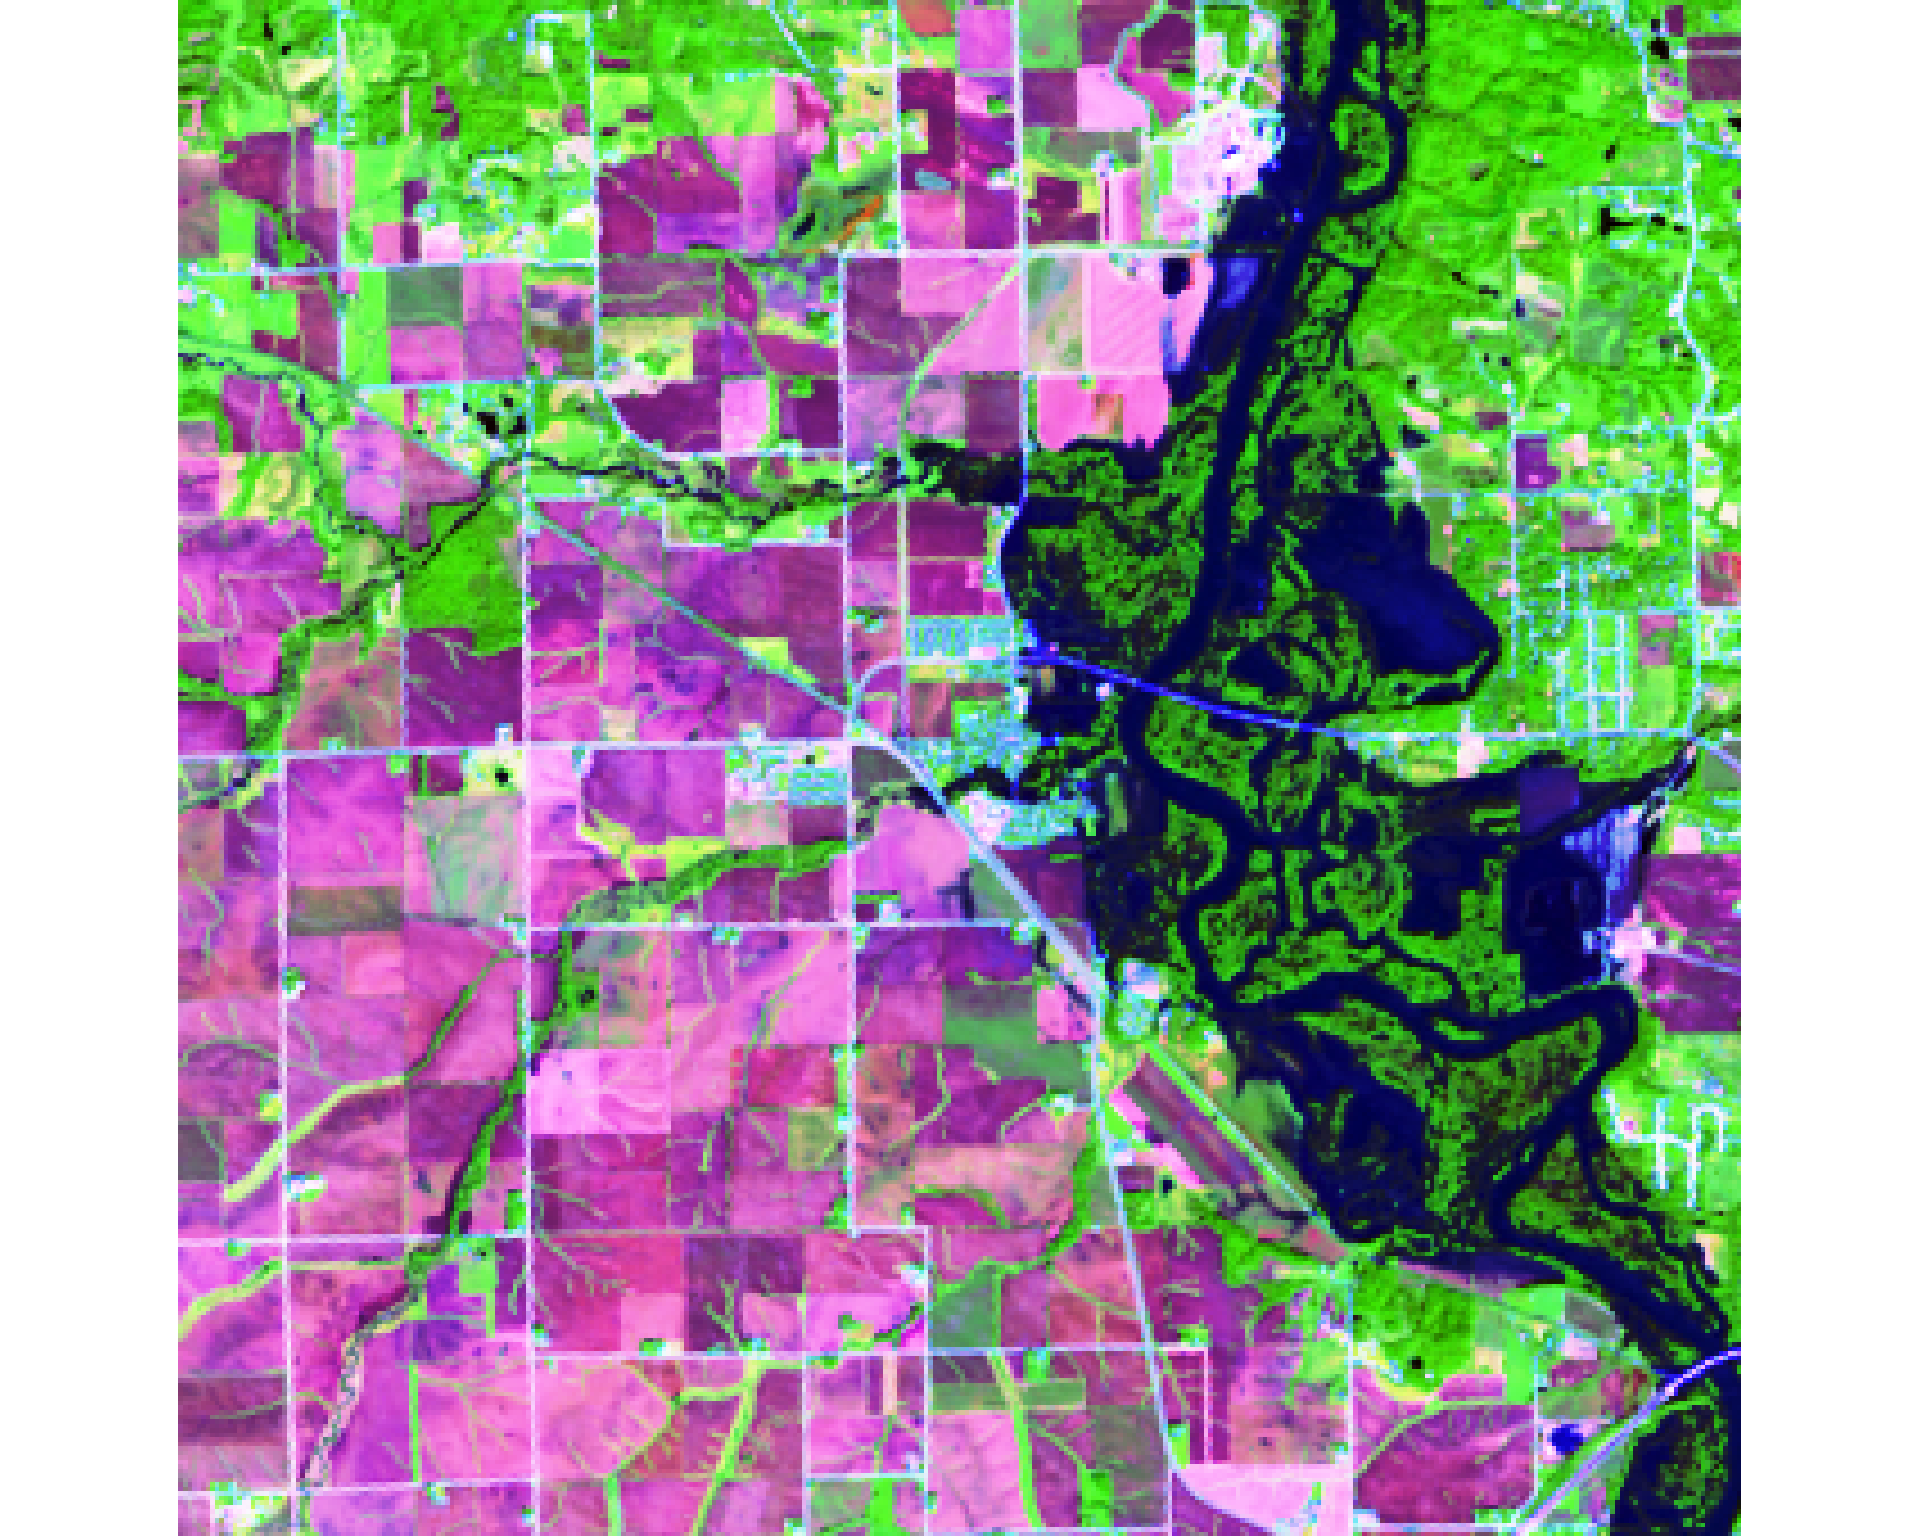 **Figure 4:** (6, 5, 2) False color for agriculture with a histogram color stretch. In this bandwith agricultural crops appear as a vibrant green, non-crop vegetation appears in a dull green, and bare earth appears in fuchsia.